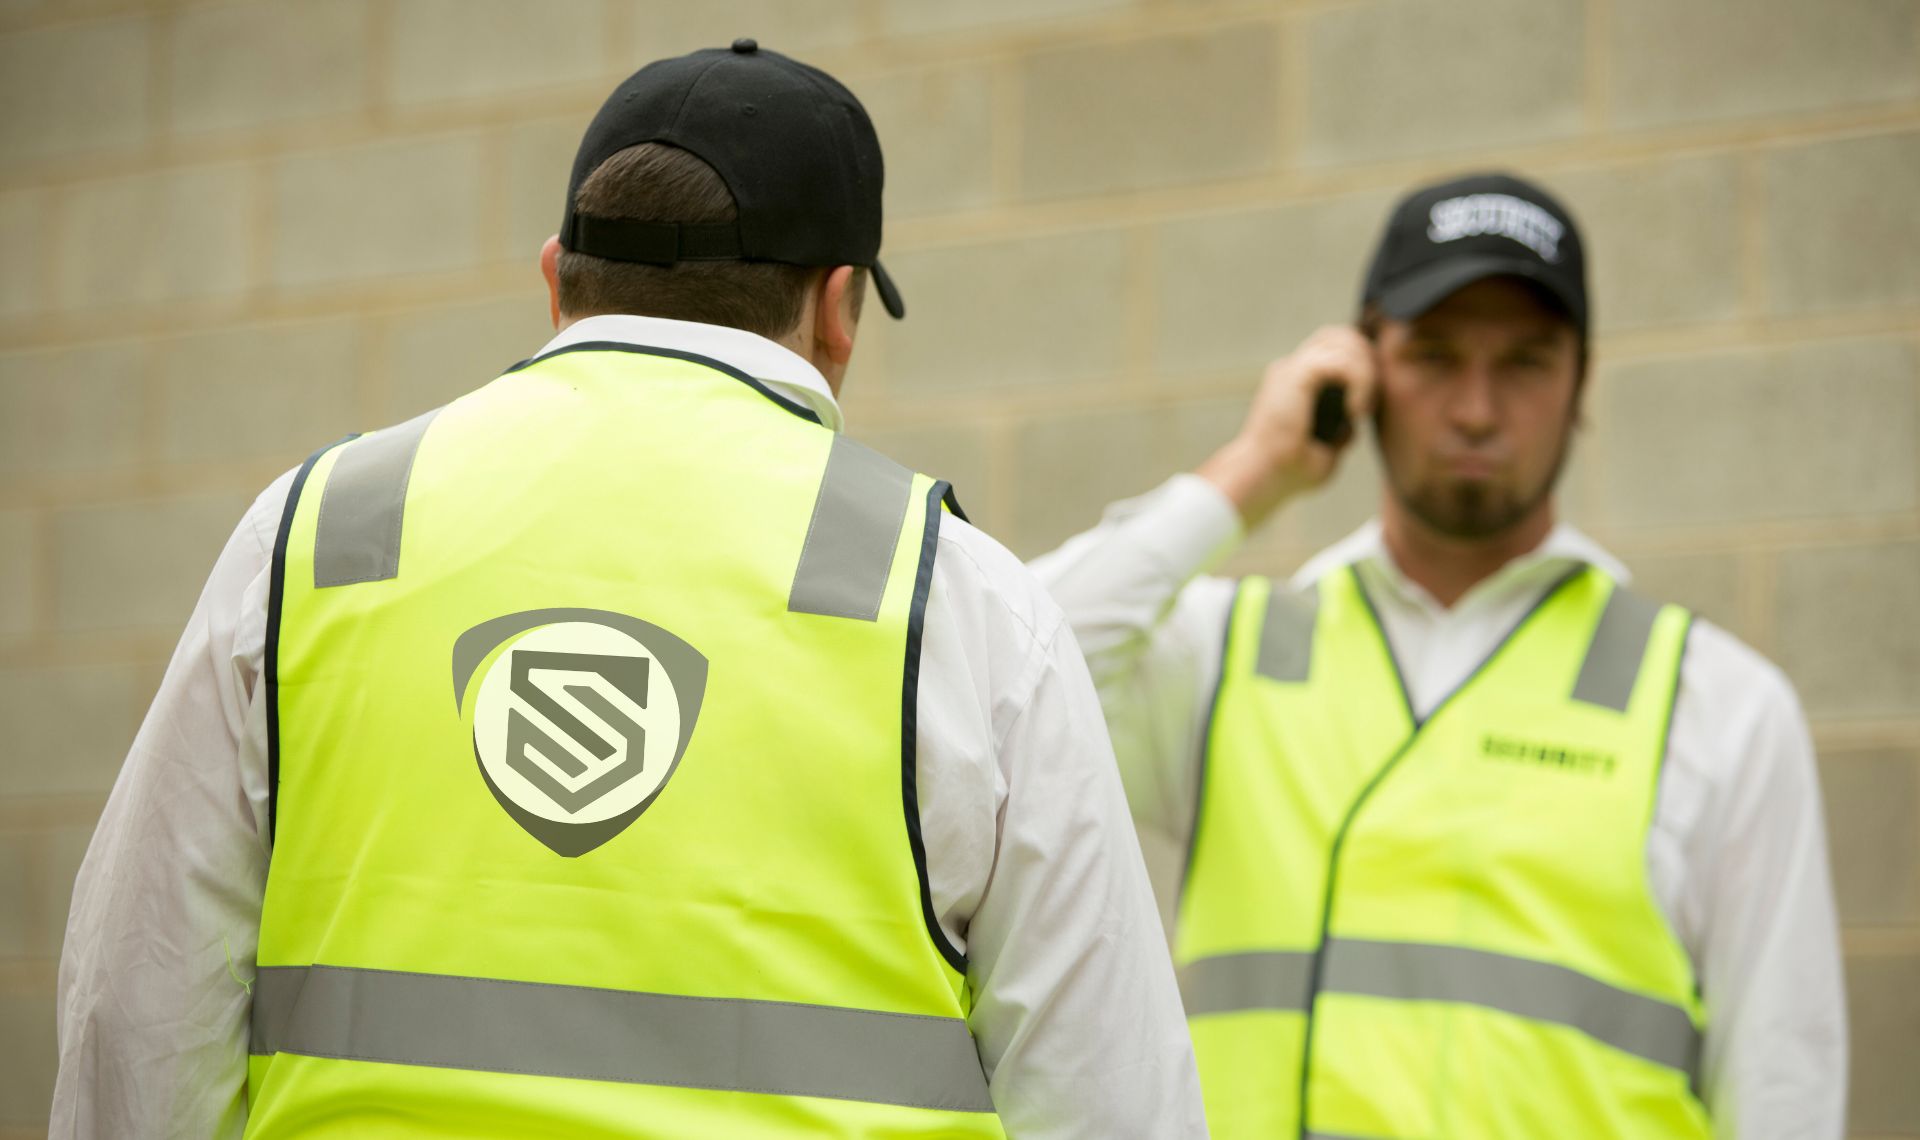 SIA Licensed Security Guards